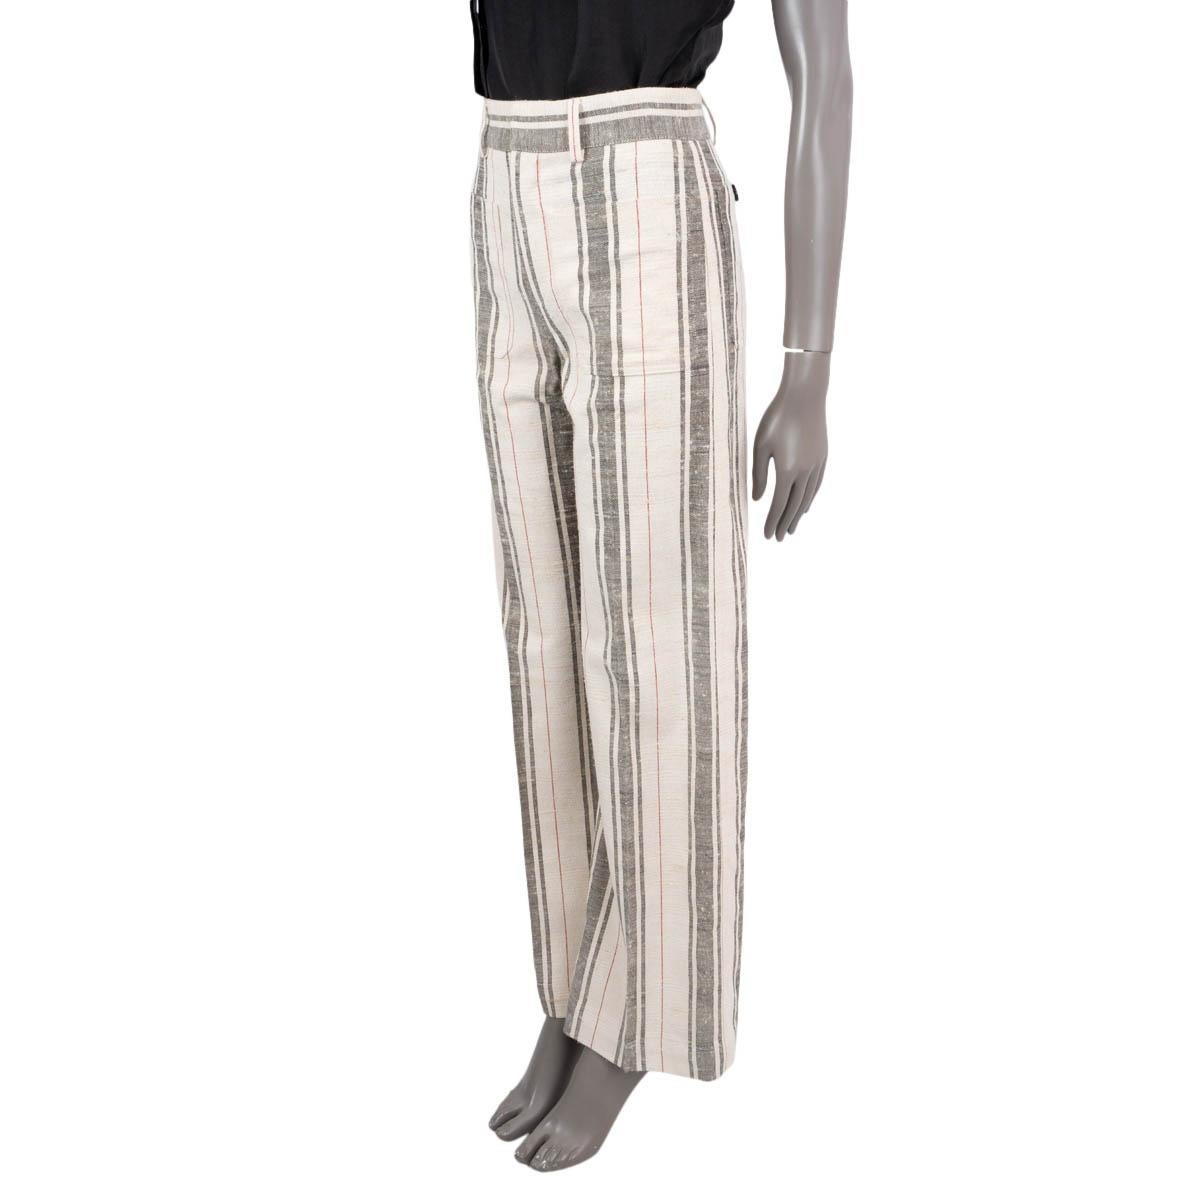 100% authentic Christian Dior ecru, black and red striped high-waist pants in cotton (51%) and silk (49%). The design features a flared leg, two front patch pockets, buttoned back patch pockets and belt loops. Have been worn once and are in